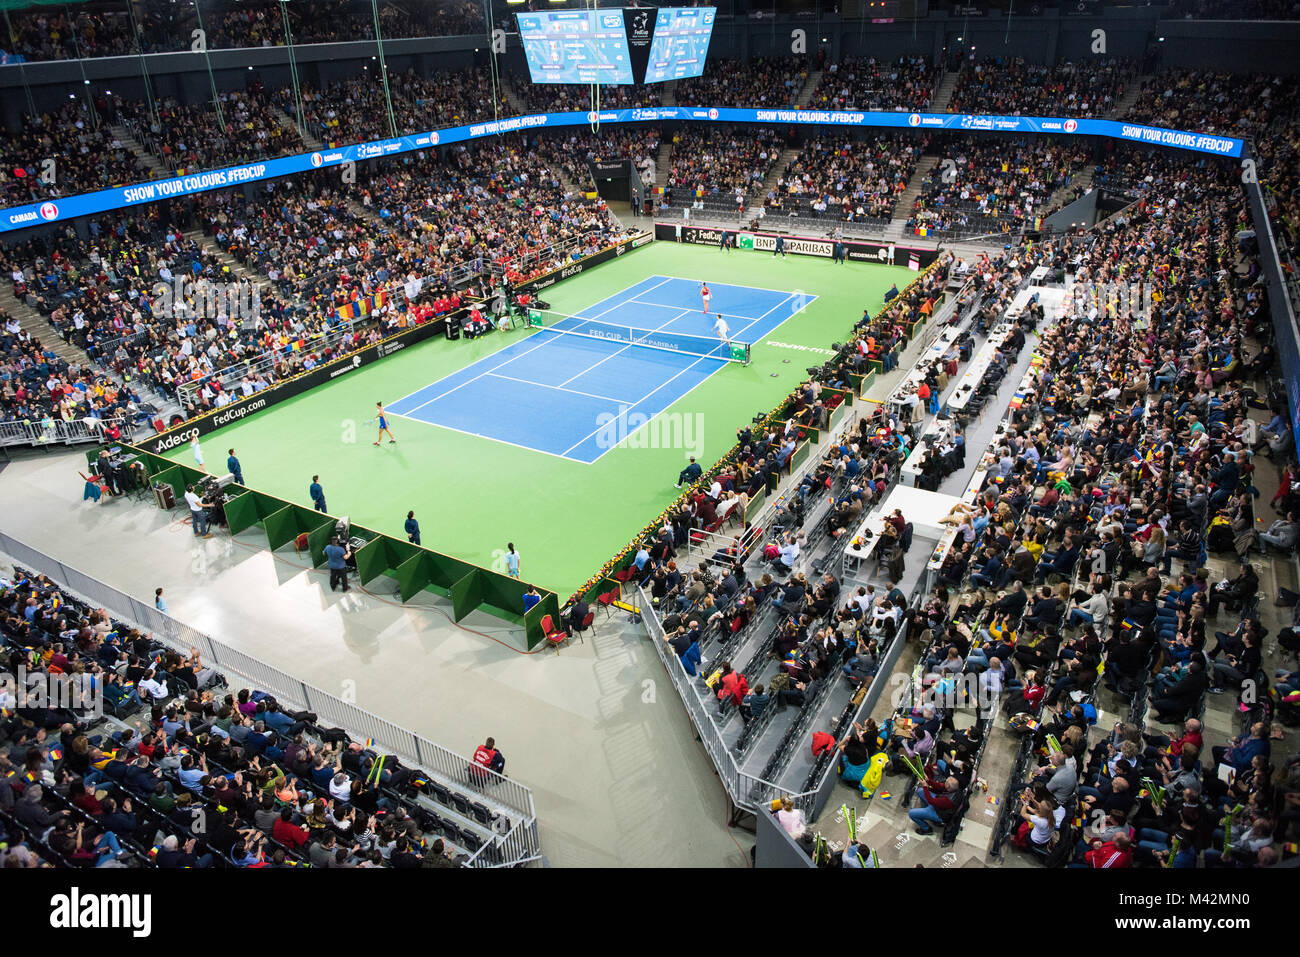 CLUJ NAPOCA, ROMANIA - FEBRUARY 10, 2018: Romania playing tennis Canada  during a Fed Cup match in the Polivalenta Hall indoor court. Crowd of  people Stock Photo - Alamy